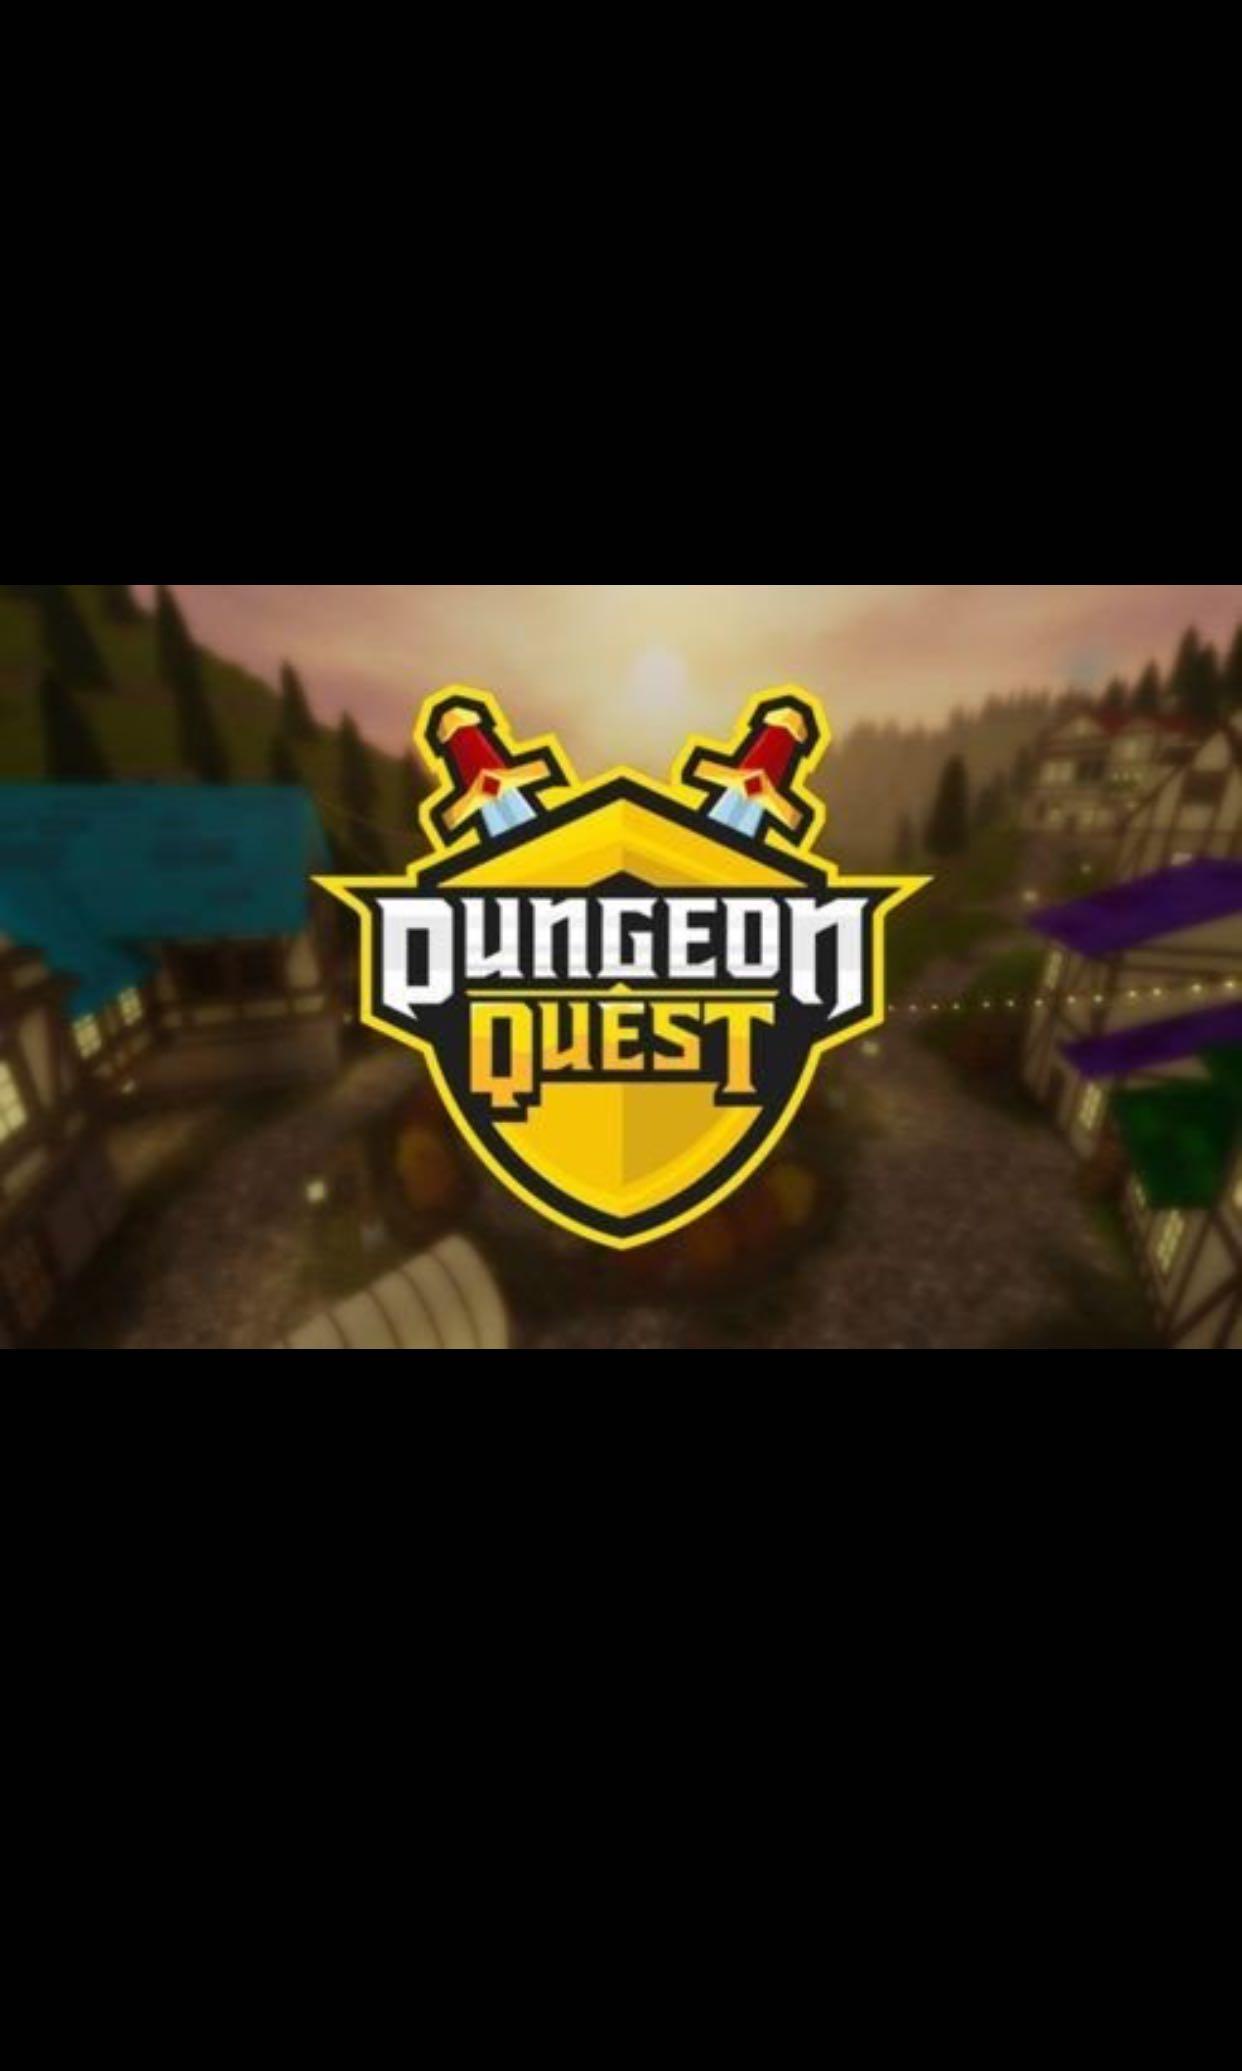 Dungeon Quest Carries Toys Games Video Gaming Video Games On Carousell - getting the new kings castle legendary roblox dungeon quest